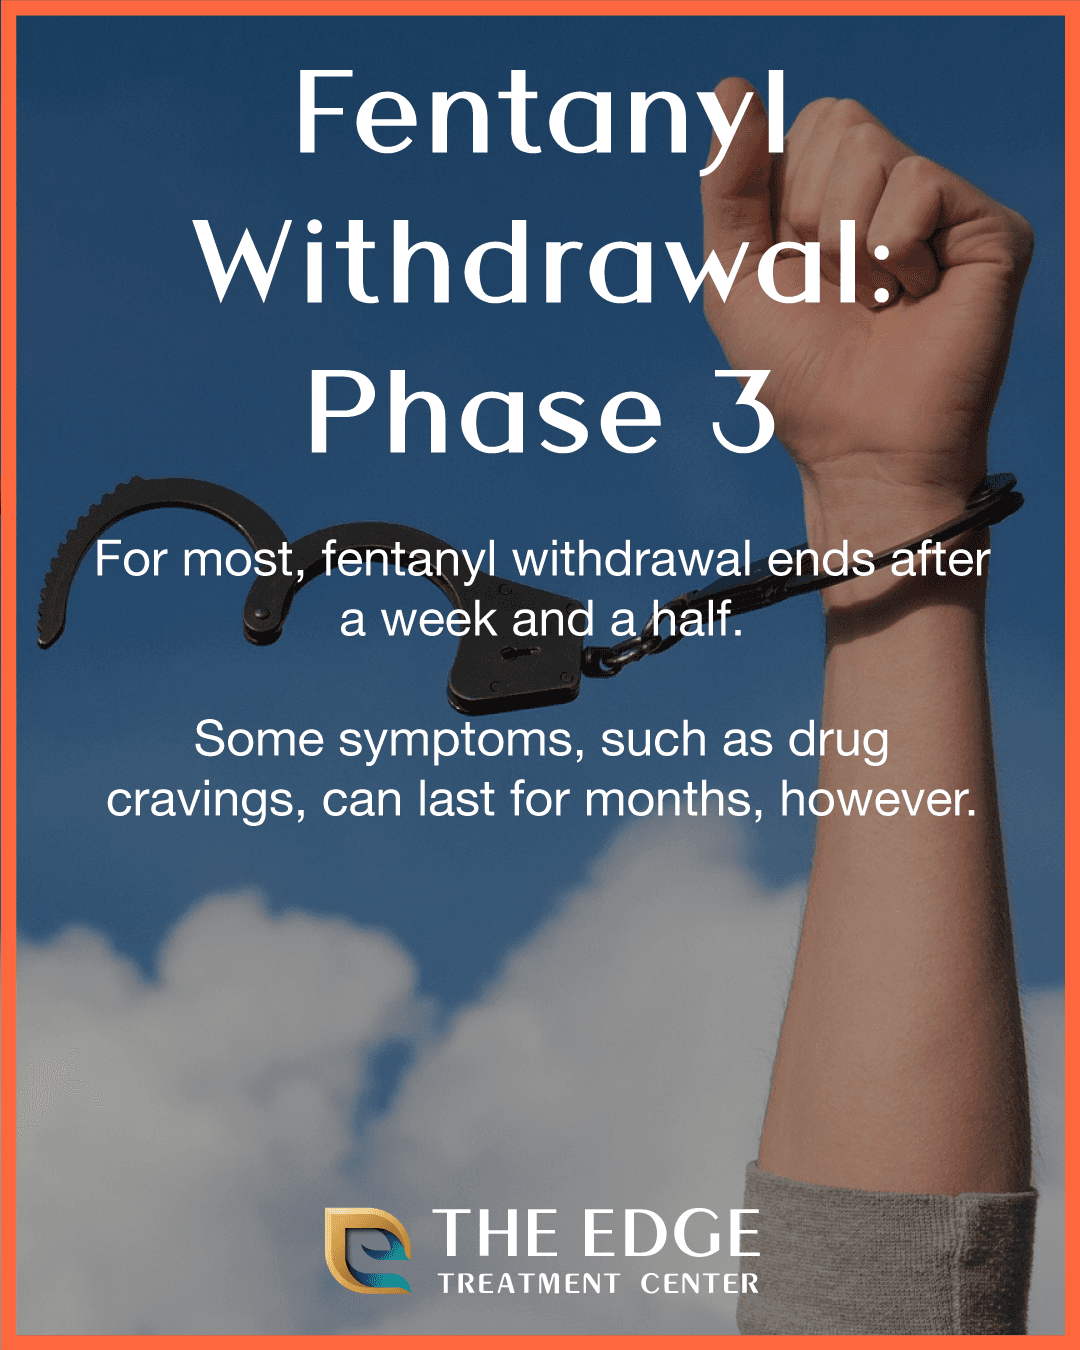 Fentanyl Withdrawal: Phase 3